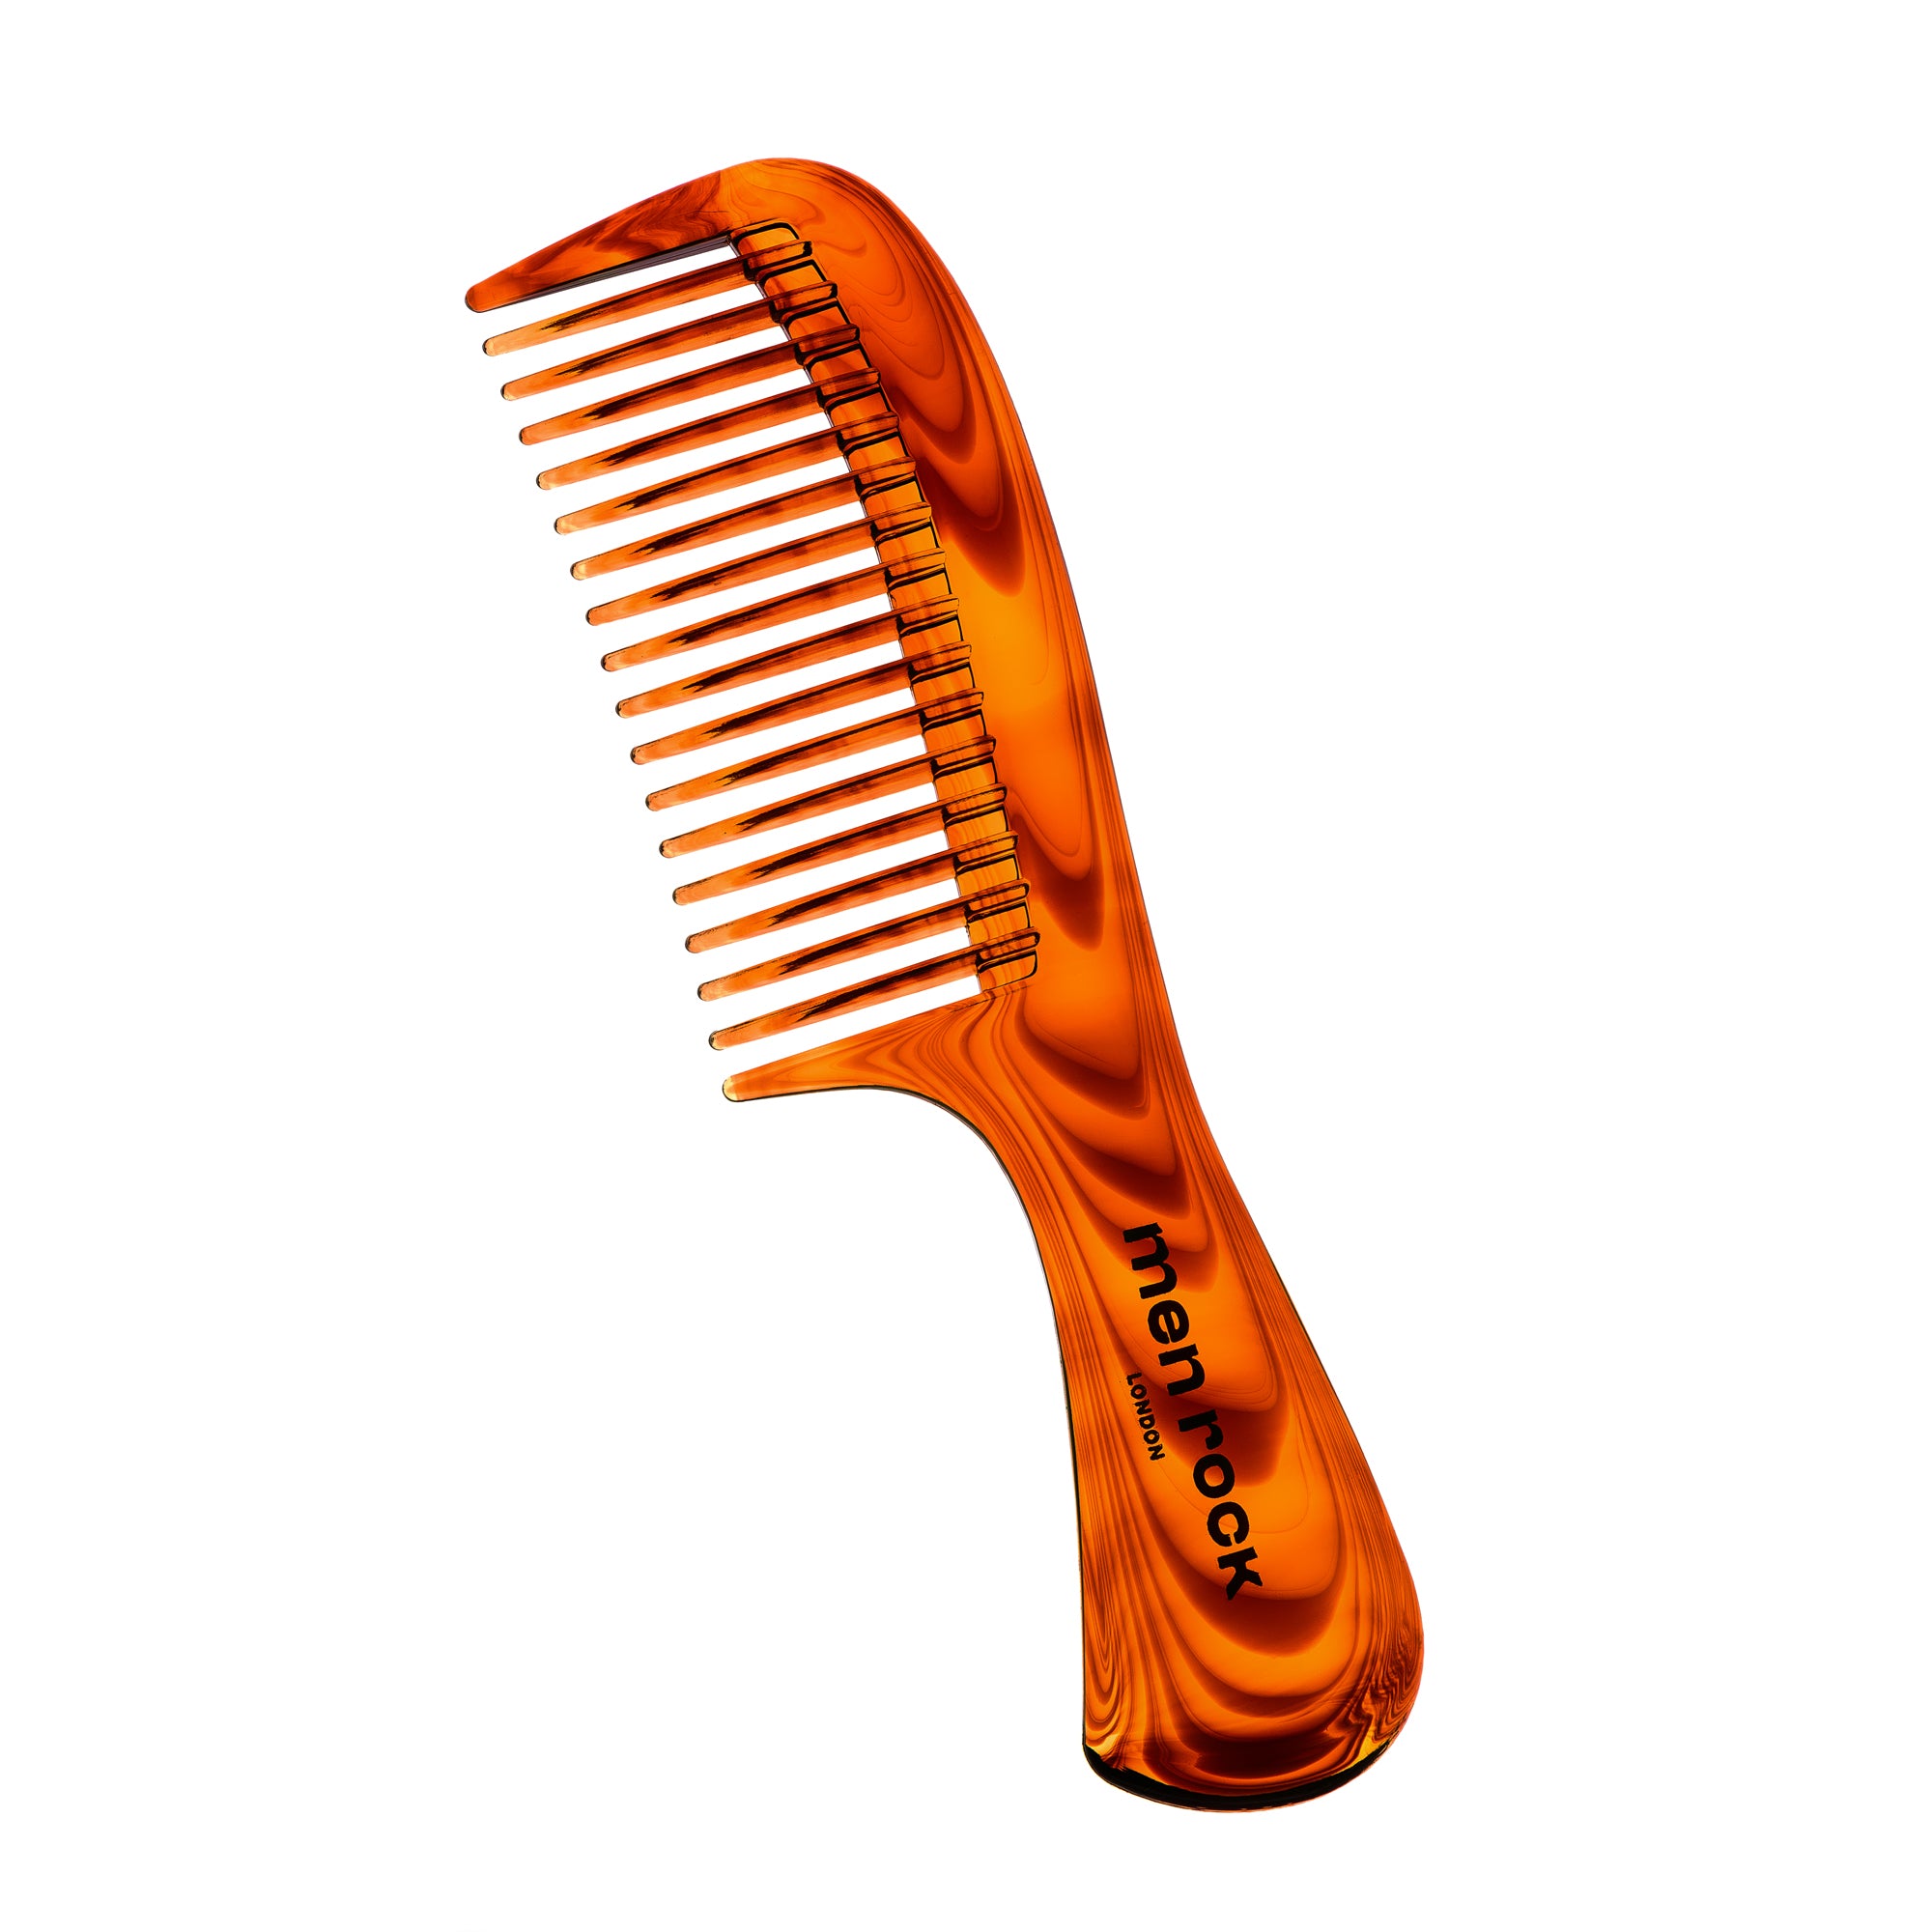 Tame and perfectly groom your facial fuzz with Men Rock Beard Comb. Its ergonomic handle sits comfortably in the hand whilst wide bristles glide effortlessly through your beard without snagging or pain. Its compact size is ideal for the man on-the-move. 